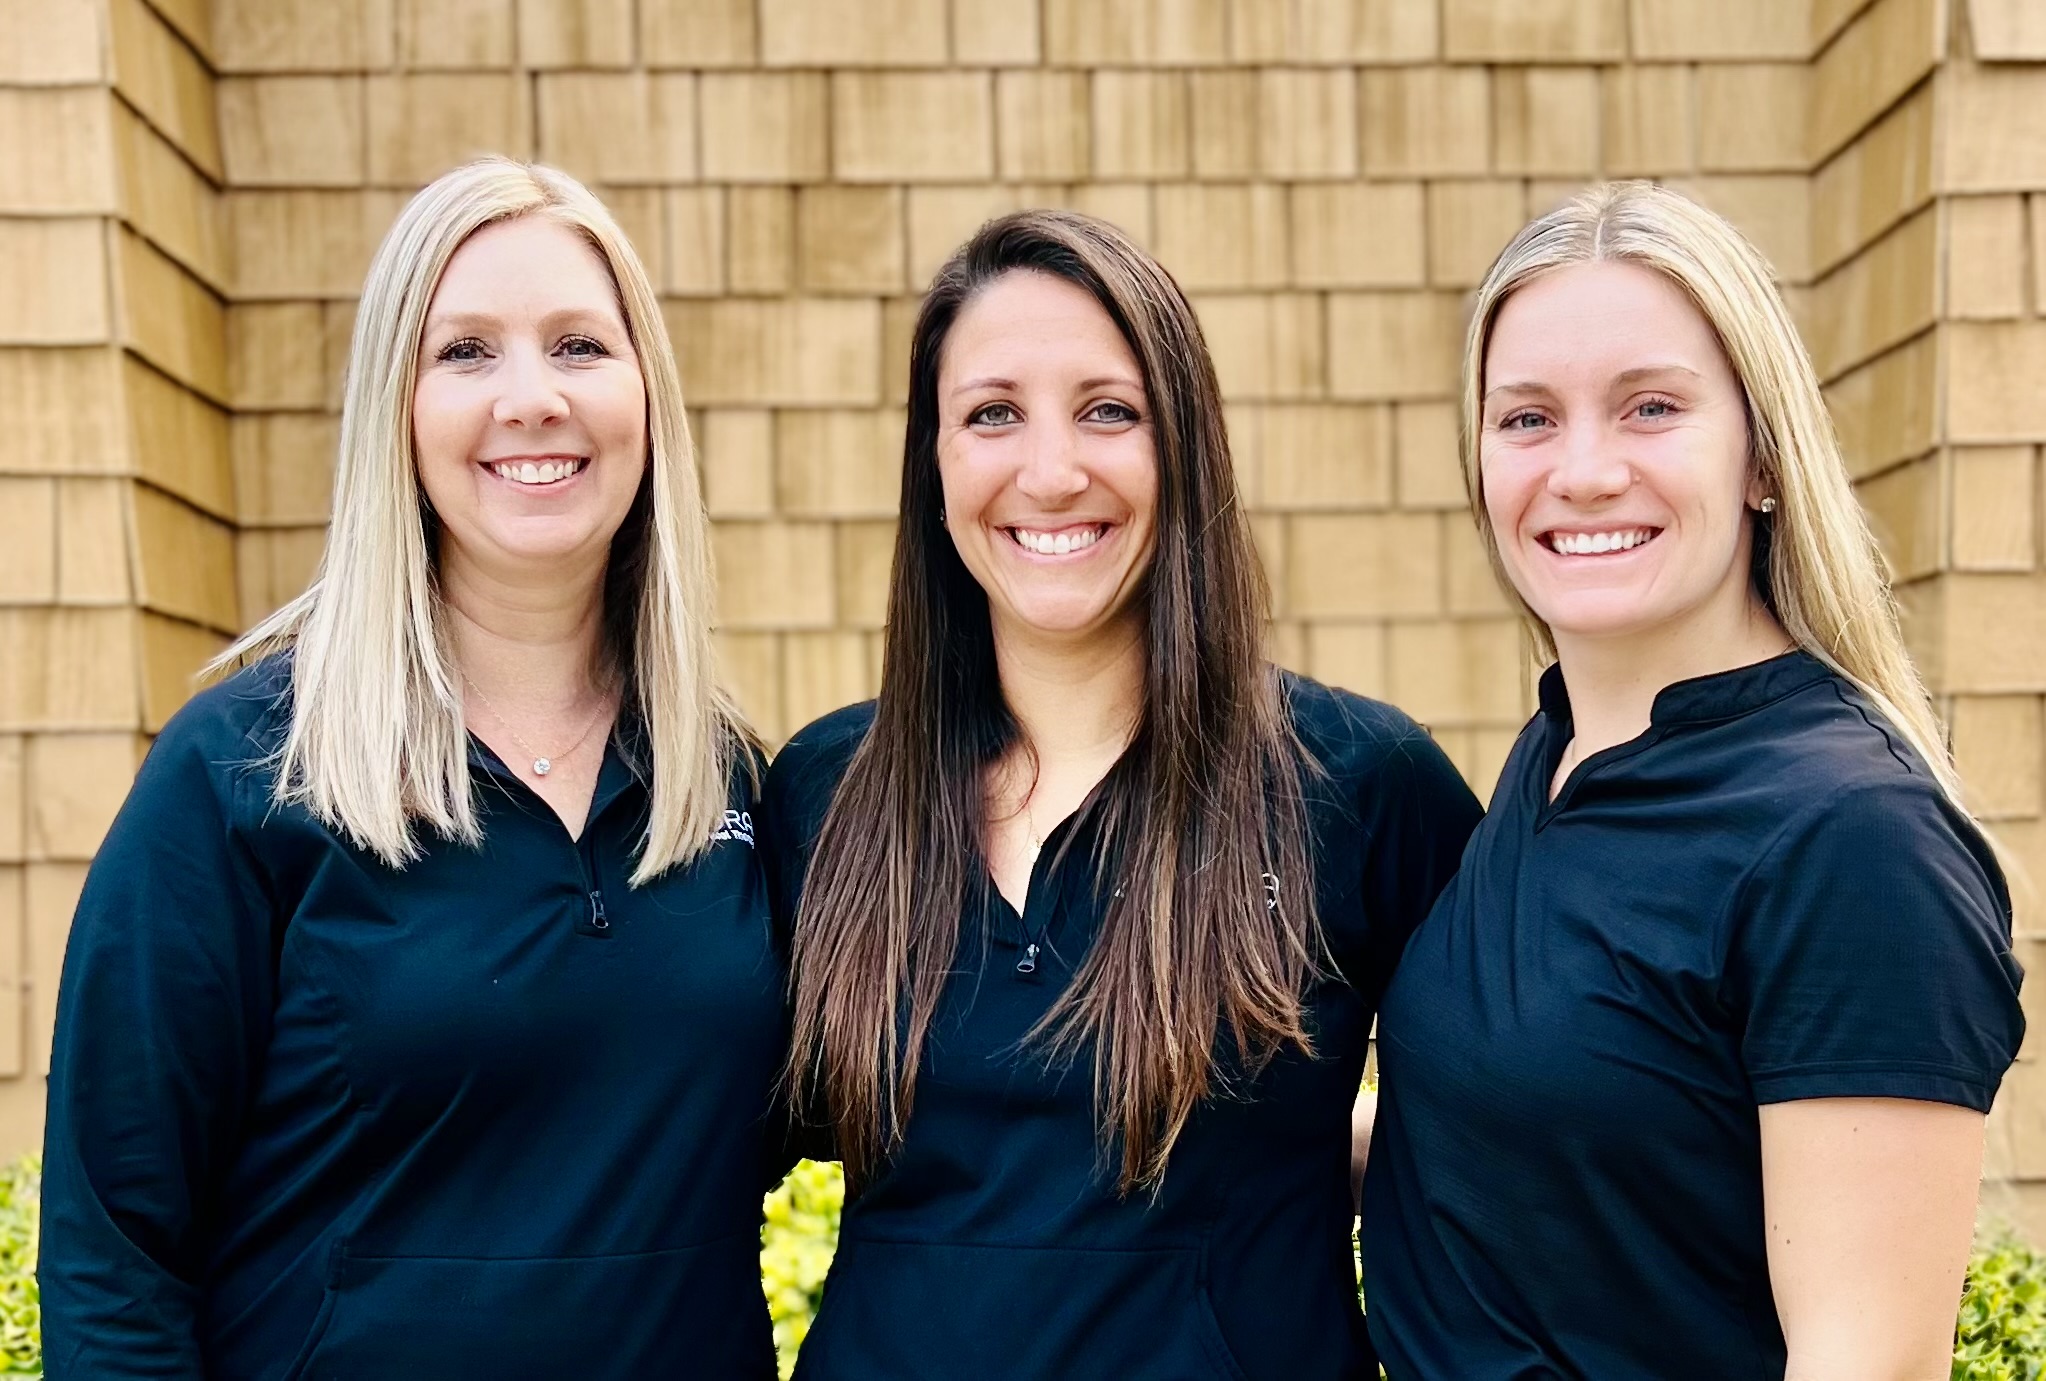 Pictured is the team at CORA Physical Therapy, Ponte Vedra Beach Amy Godfrey, PTA (left) and Andrea Brogden, PT, DPT, (center)